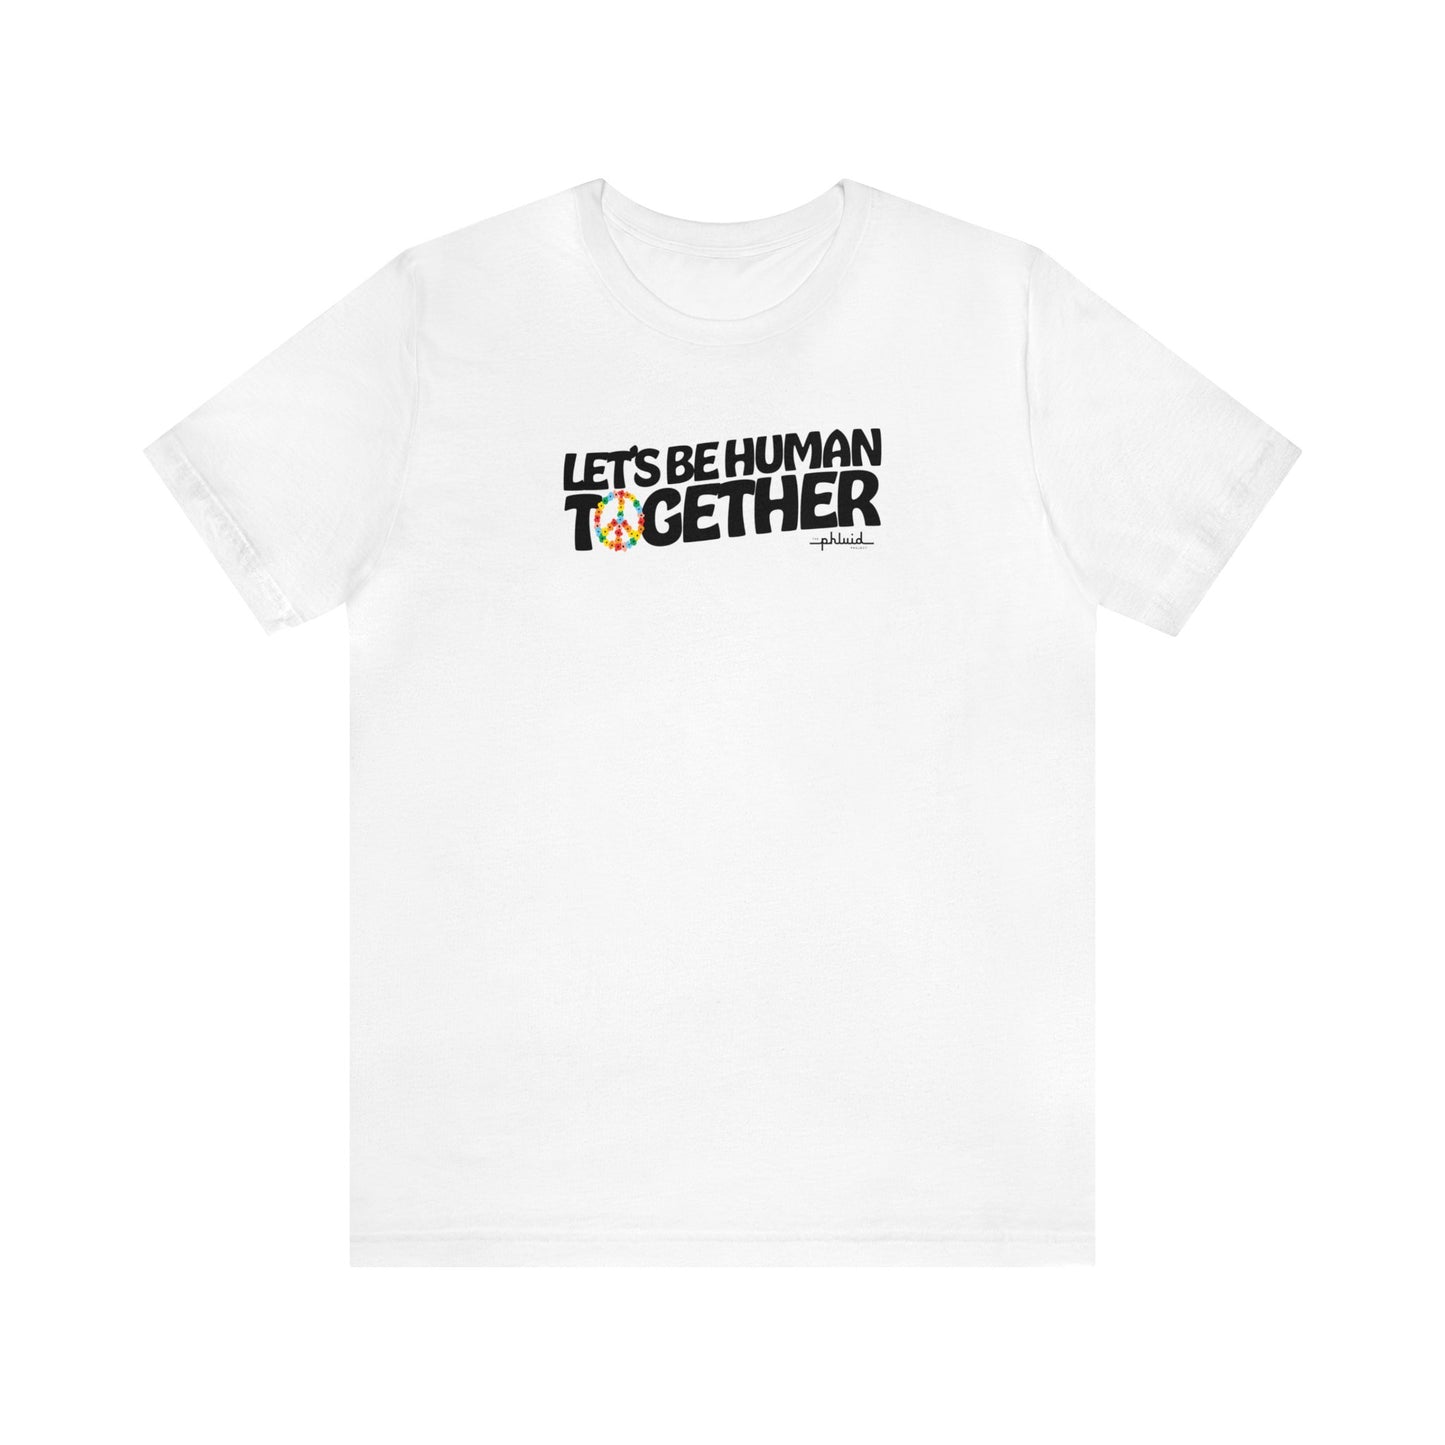 Let's Be Human Together Tee